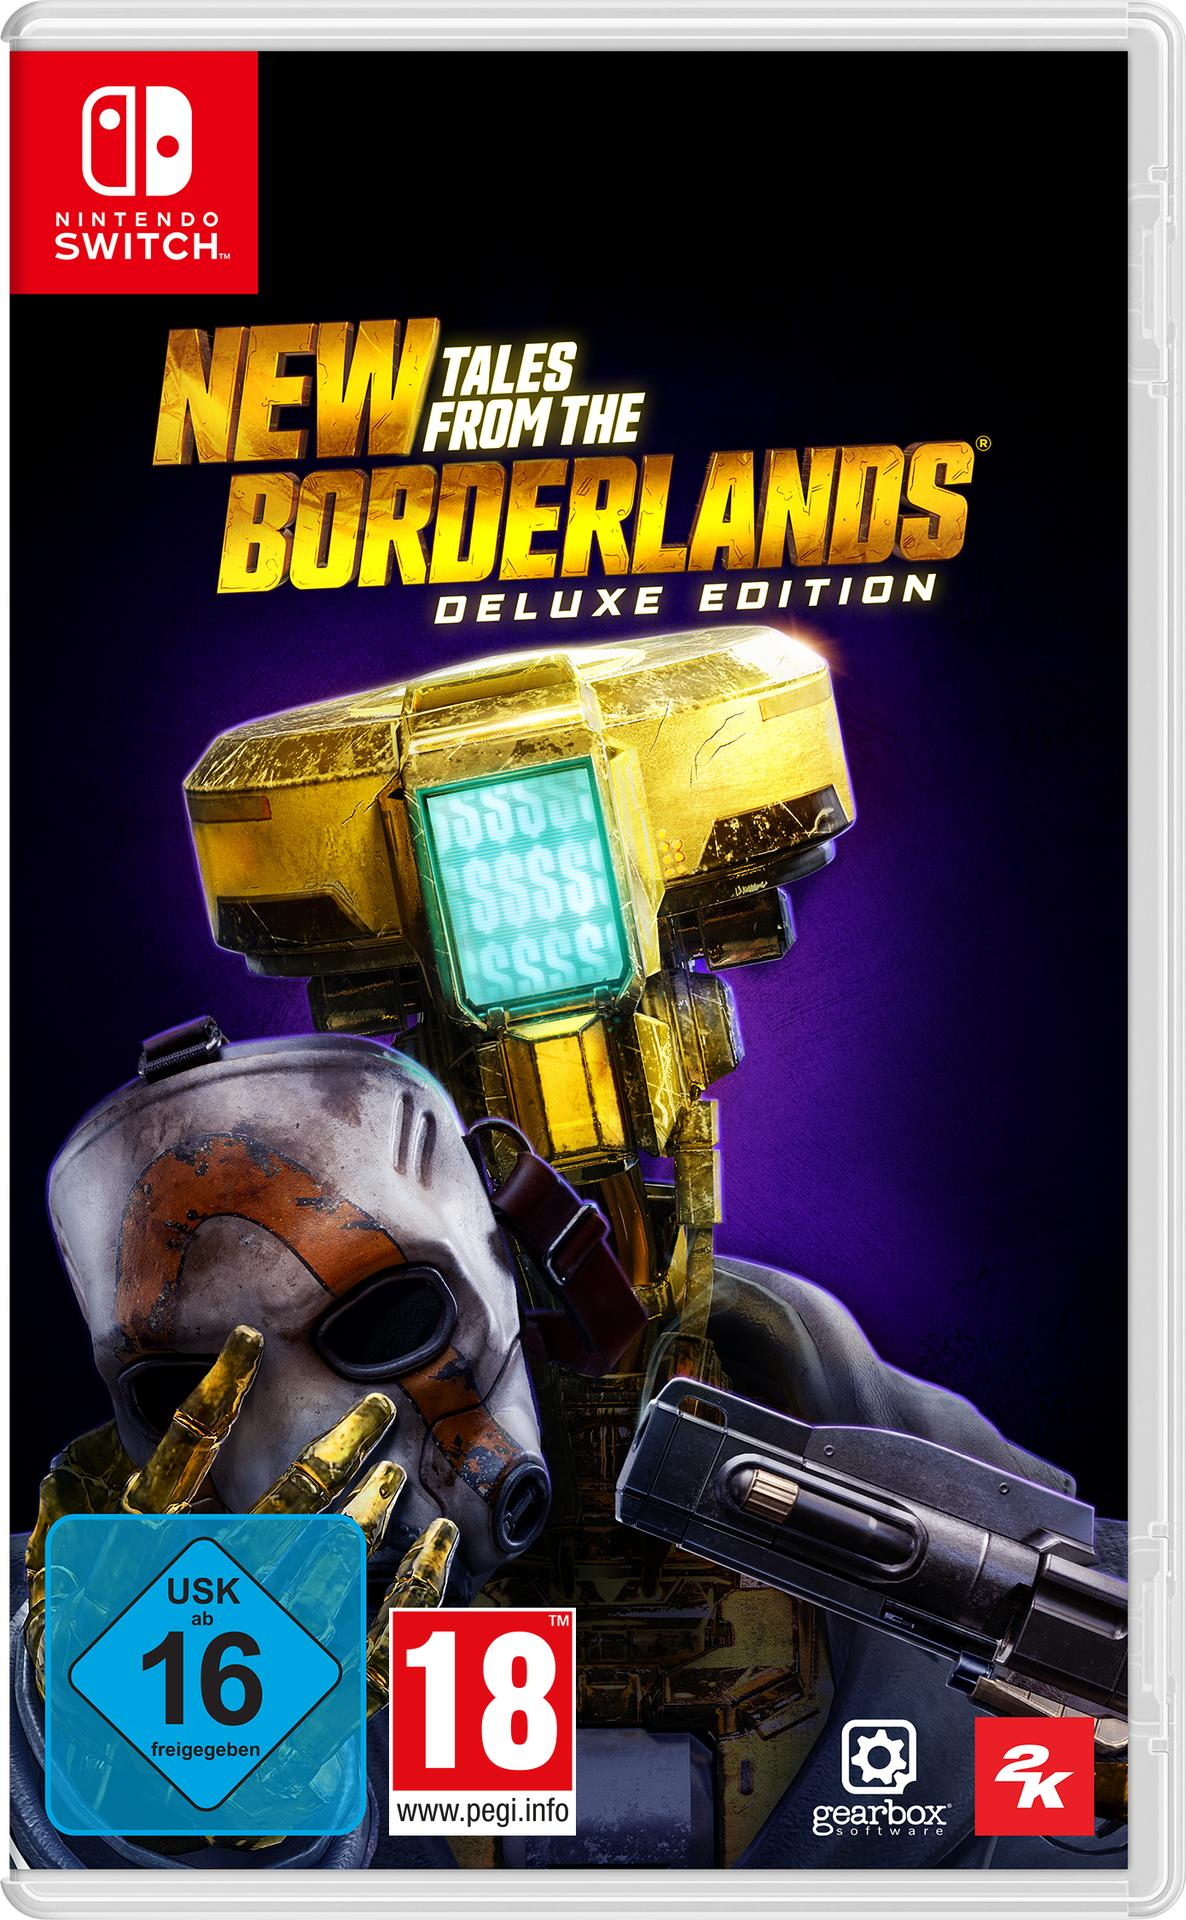 New - Deluxe the from Switch] Borderlands [Nintendo - Edition Tales